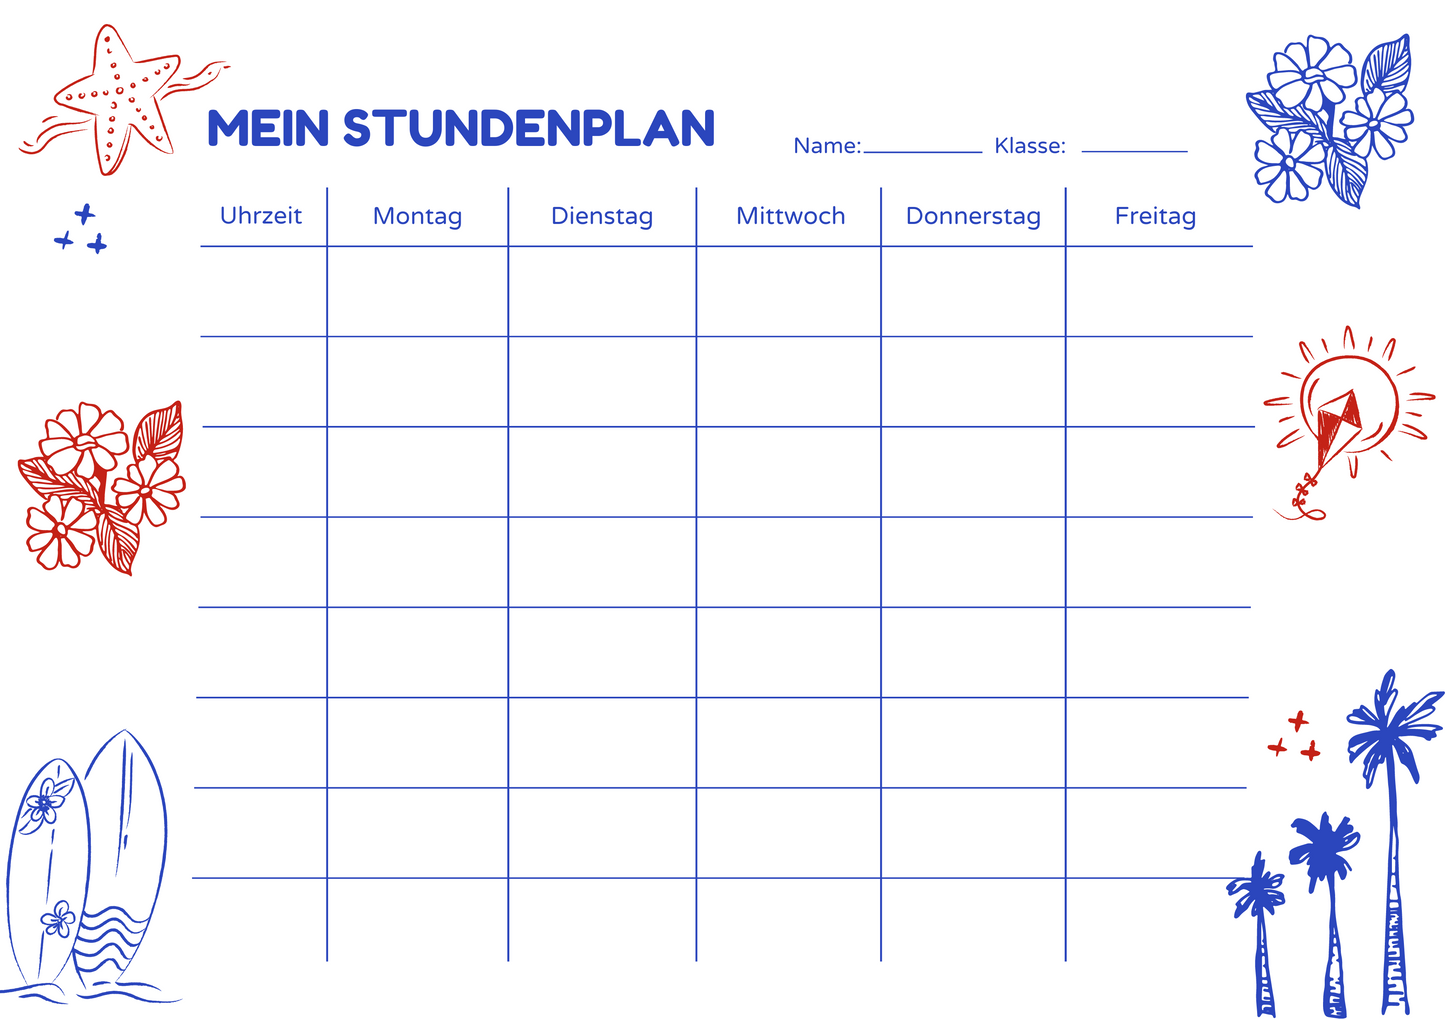 Timetable with Colorful Designs - Available in German and English